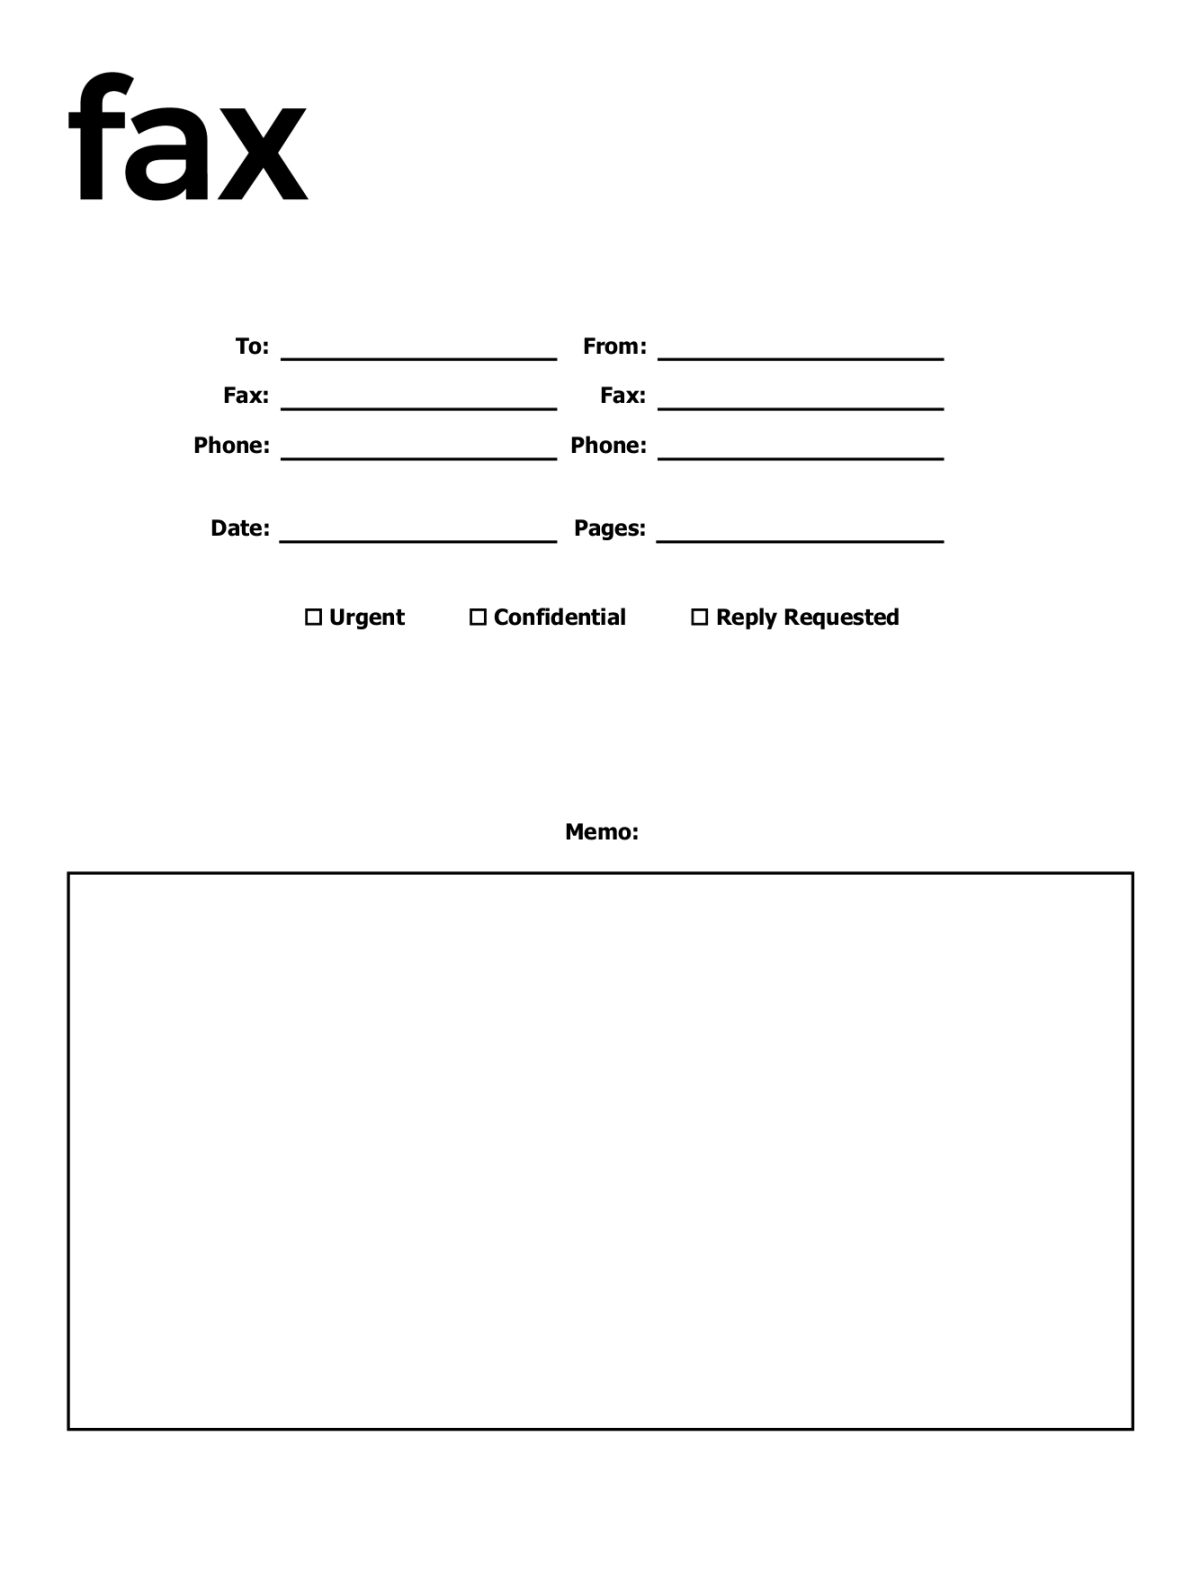 Free Fax Cover Sheets  FaxBurner